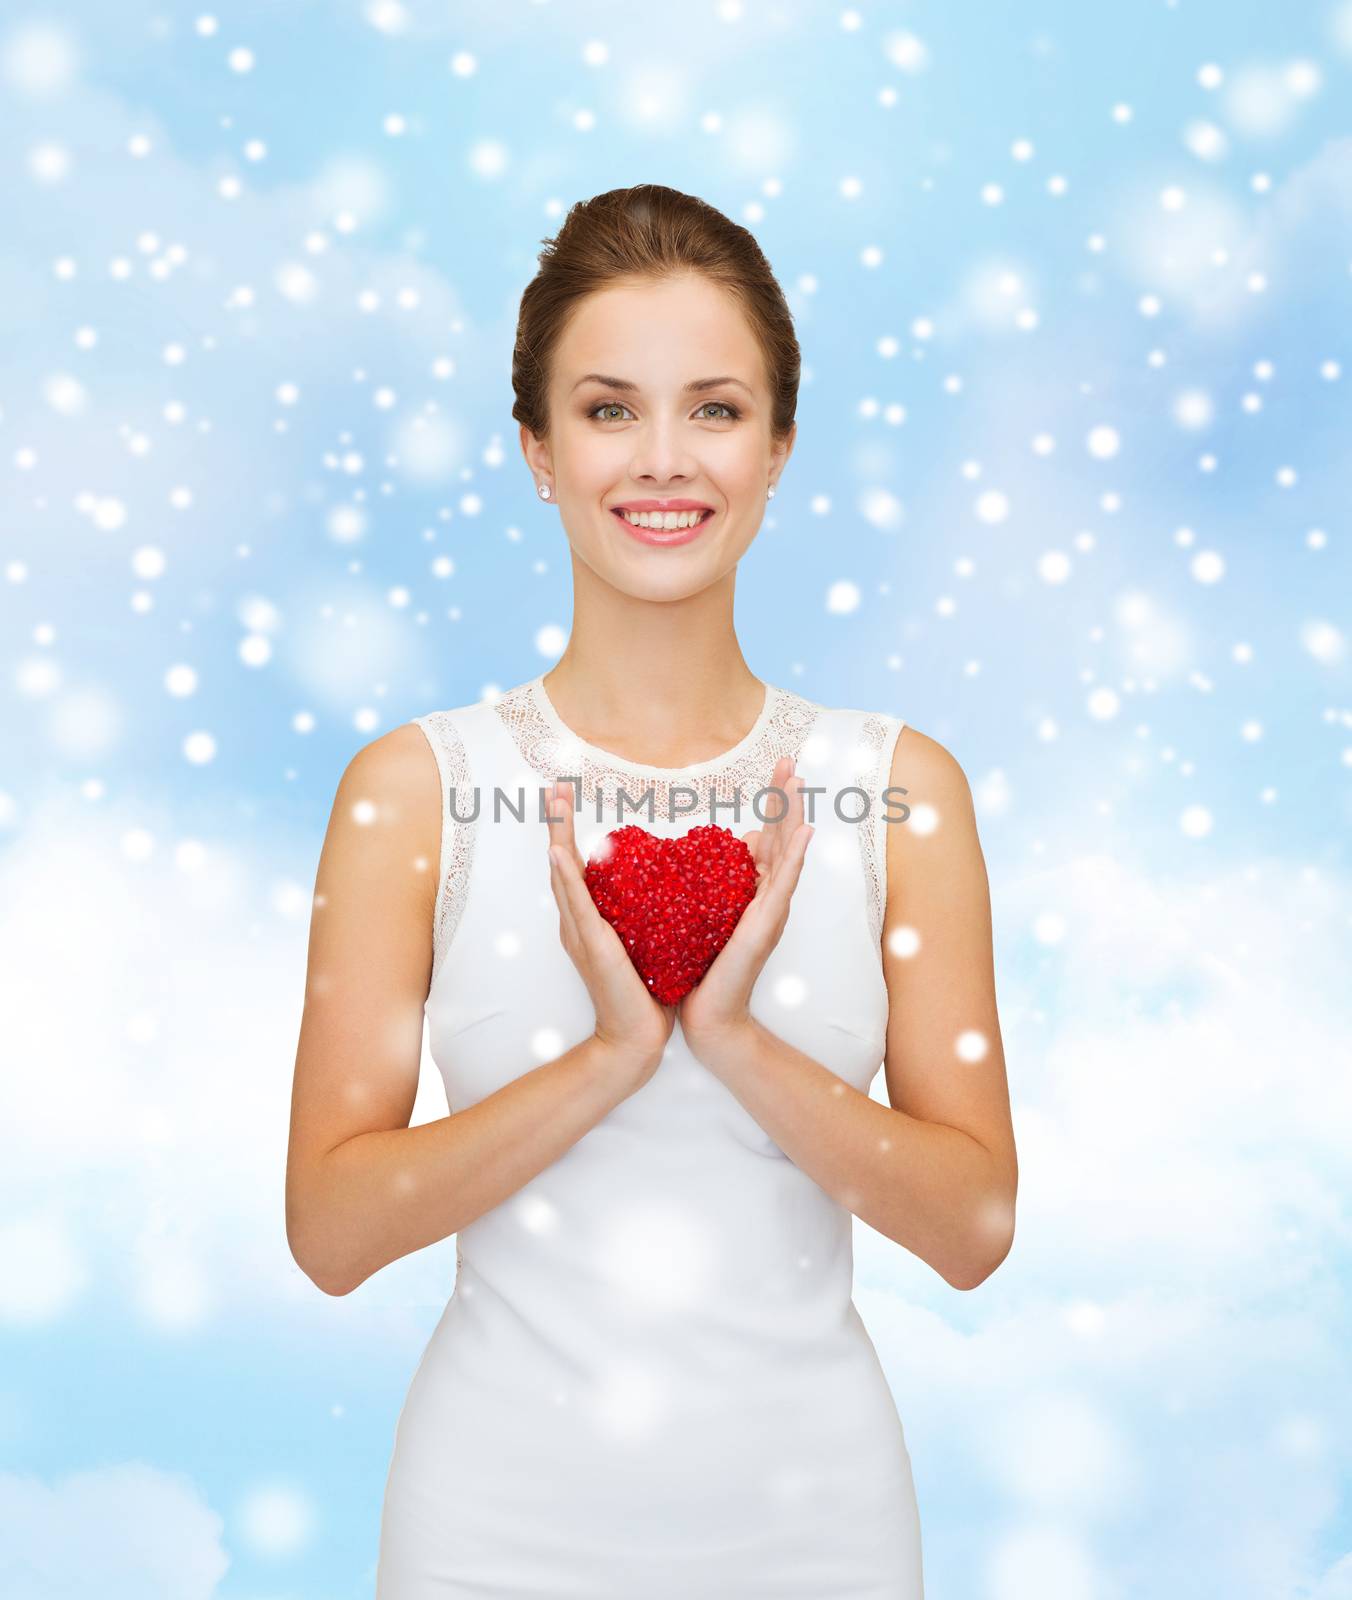 happiness, health, charity and love concept - smiling woman in white dress with red heart over blue cloudy sky and snow background